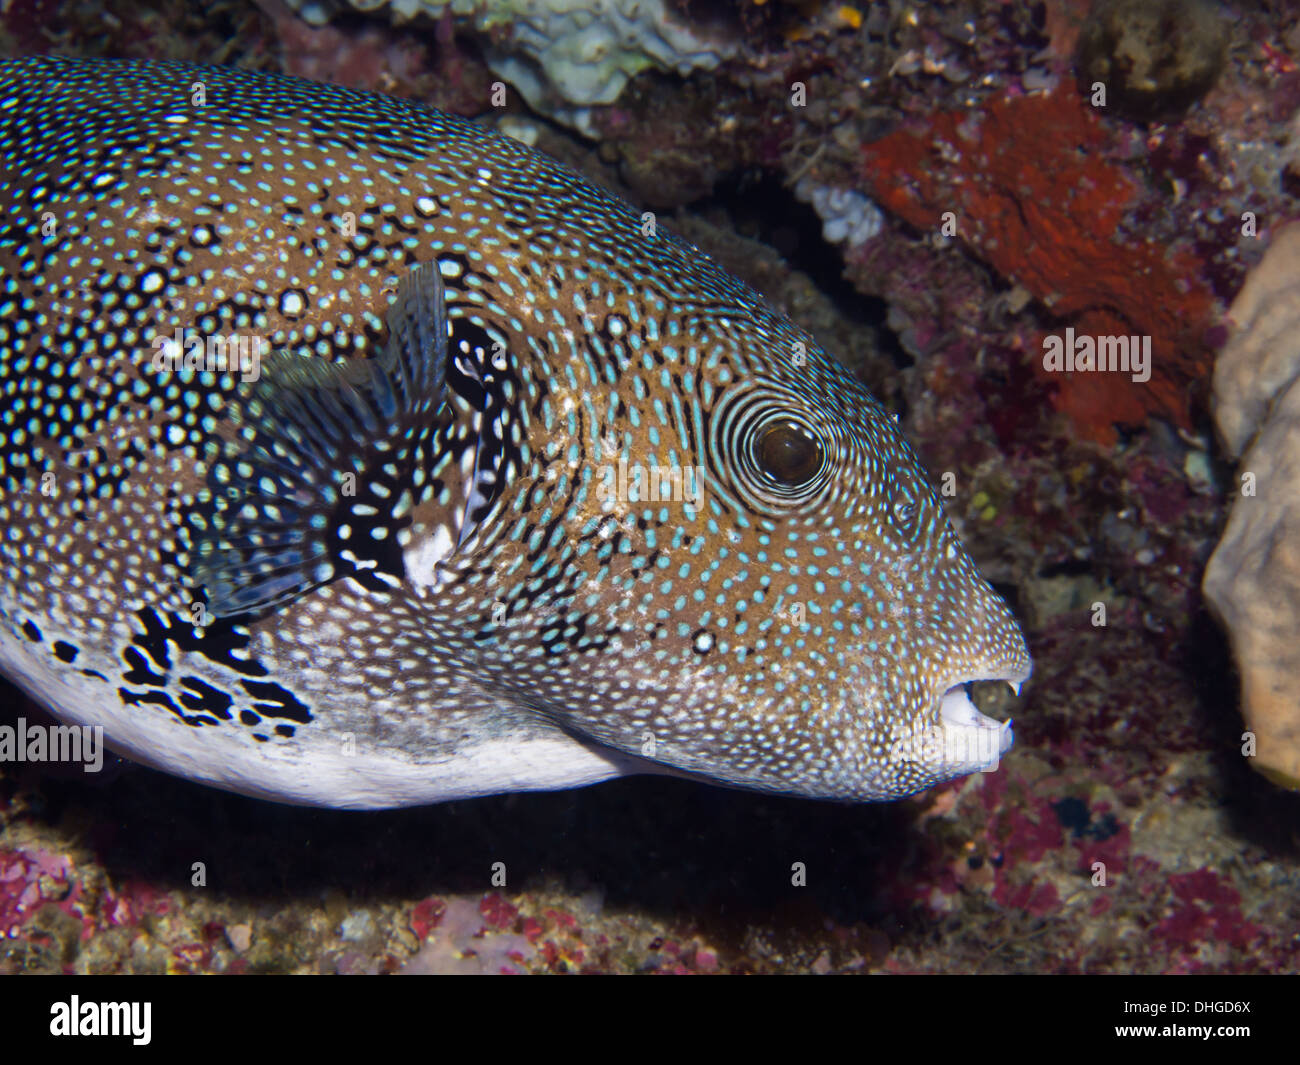 Close-up of a Blue Spotted Puffer fish Stock Photo